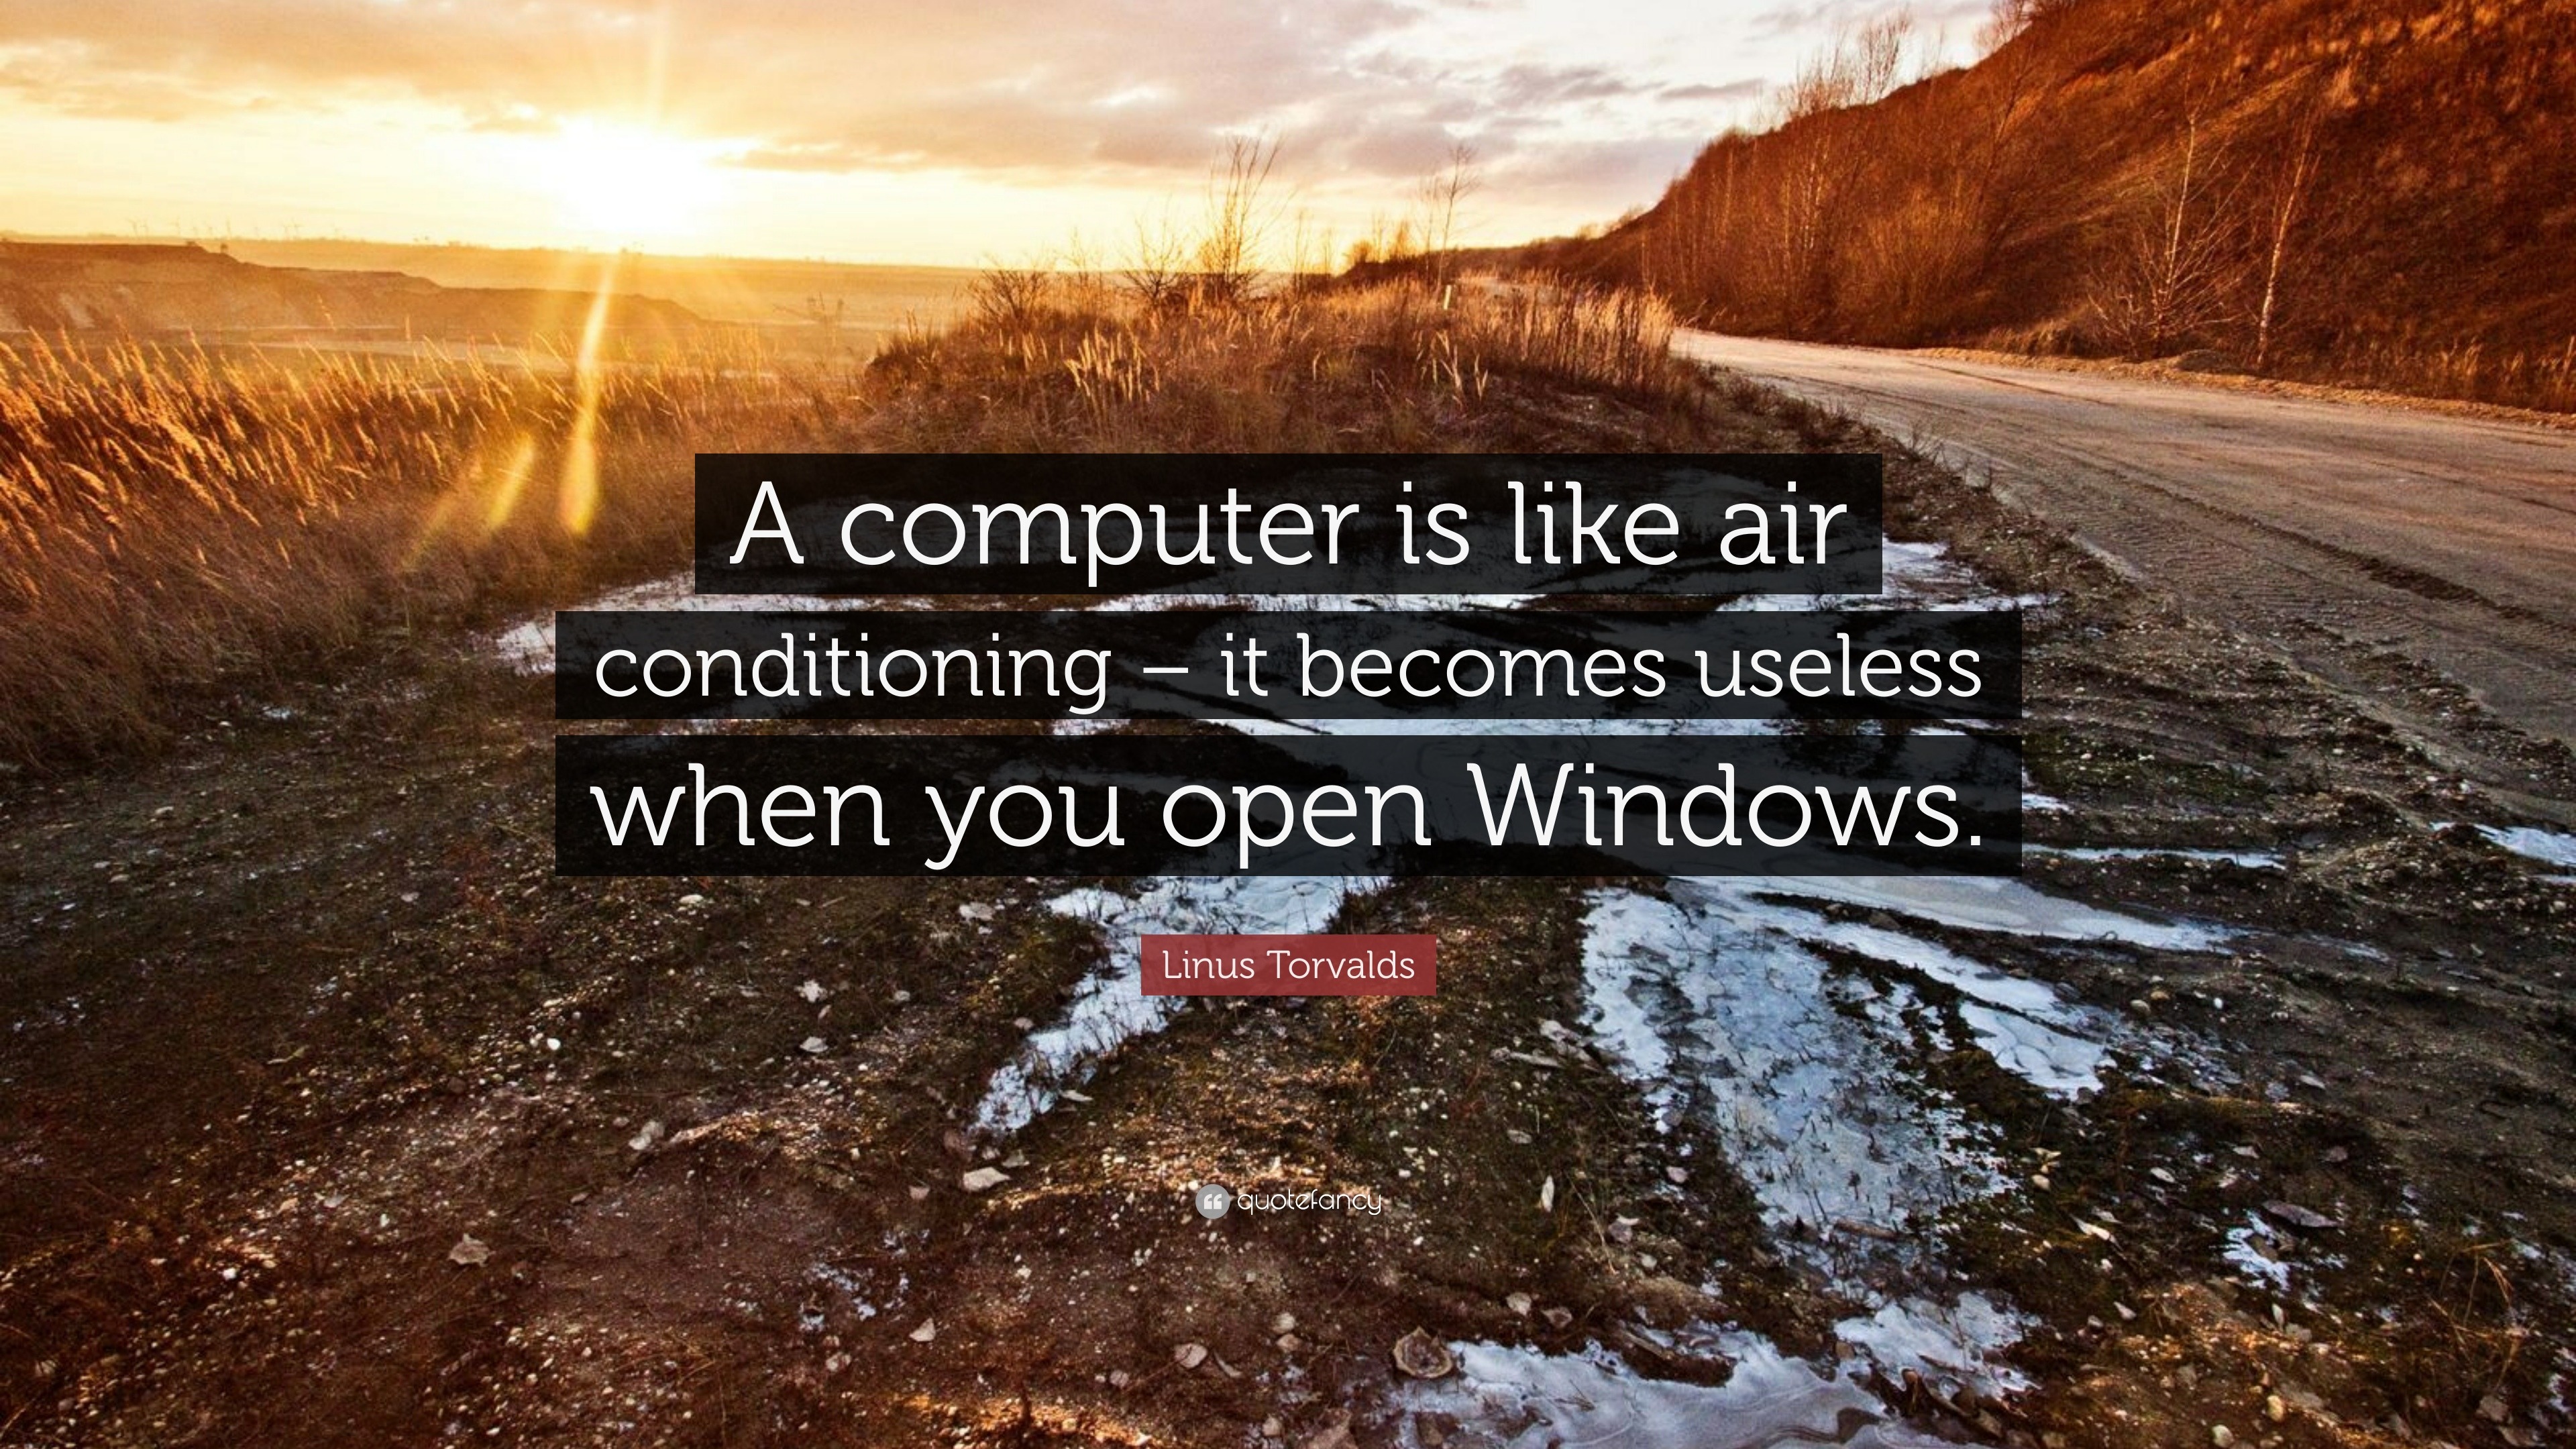 Linus Torvalds Quote “A puter is like air conditioning – it be es useless when